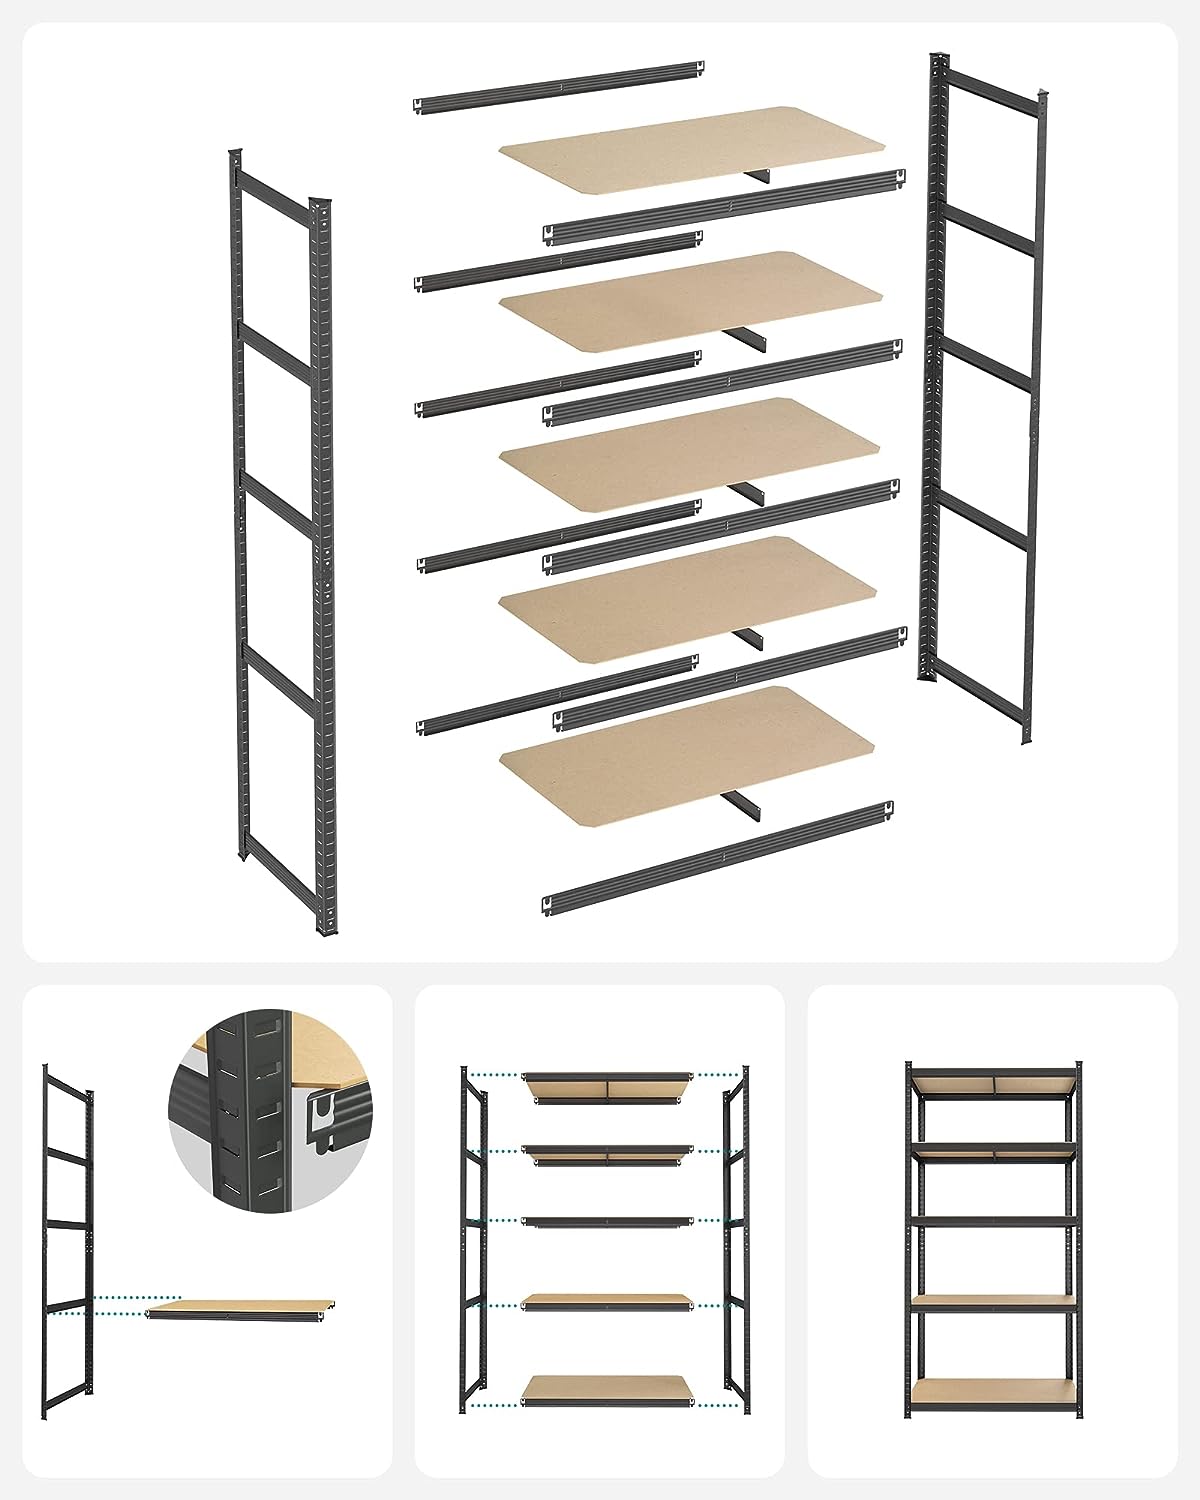 5-Tier Shelving Unit, Steel Shelving Unit for Storage, Boltless Assembly, for Garage, Shed, Load Capacity 600 kg, SONGMICS, 4